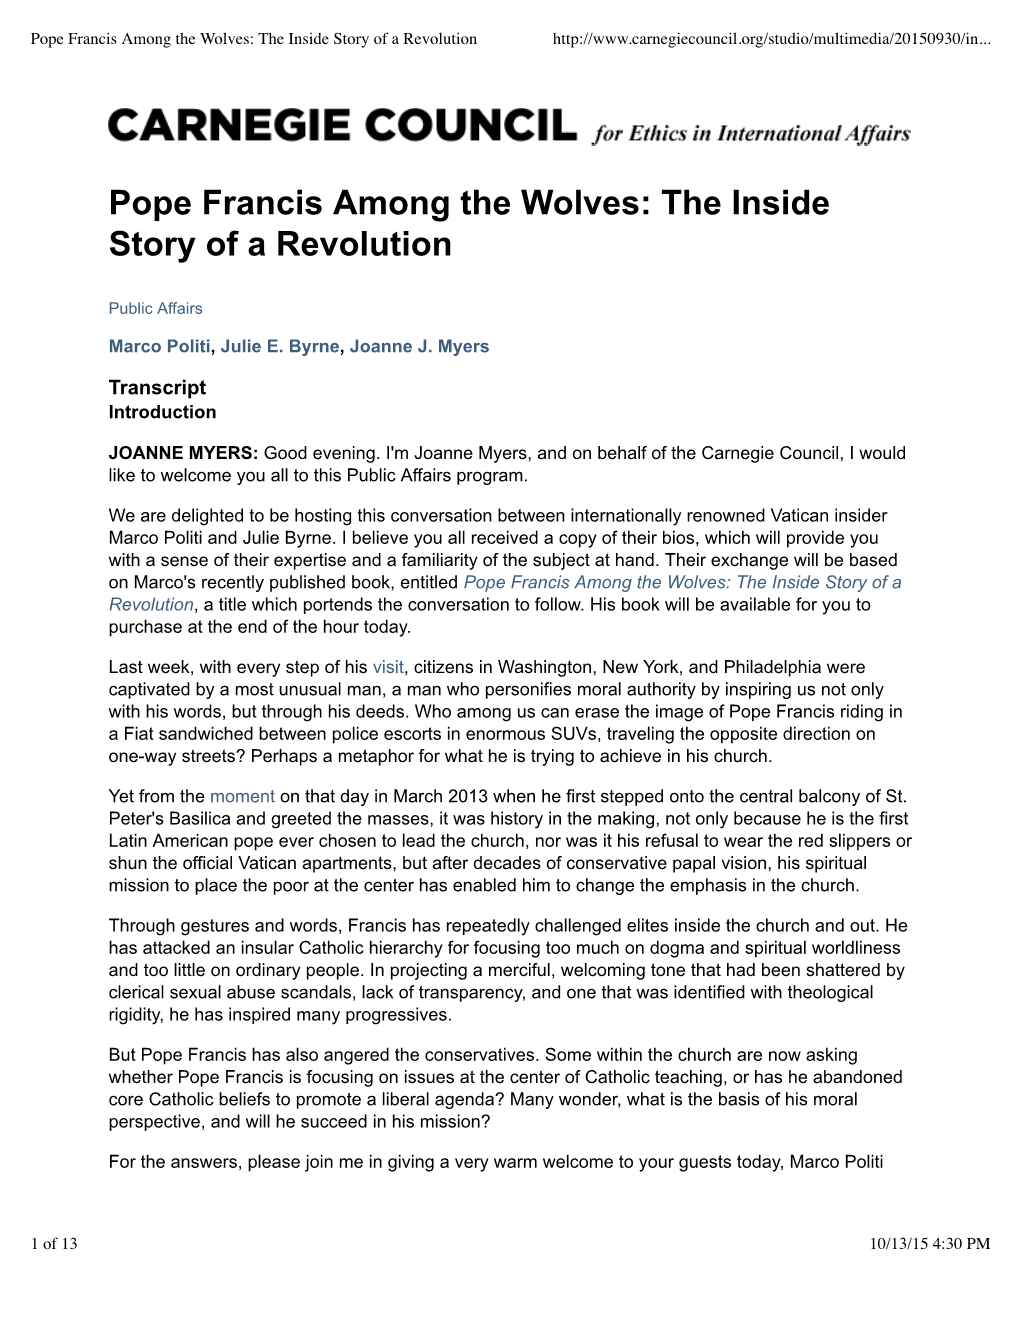 Pope Francis Among the Wolves: the Inside Story of a Revolution